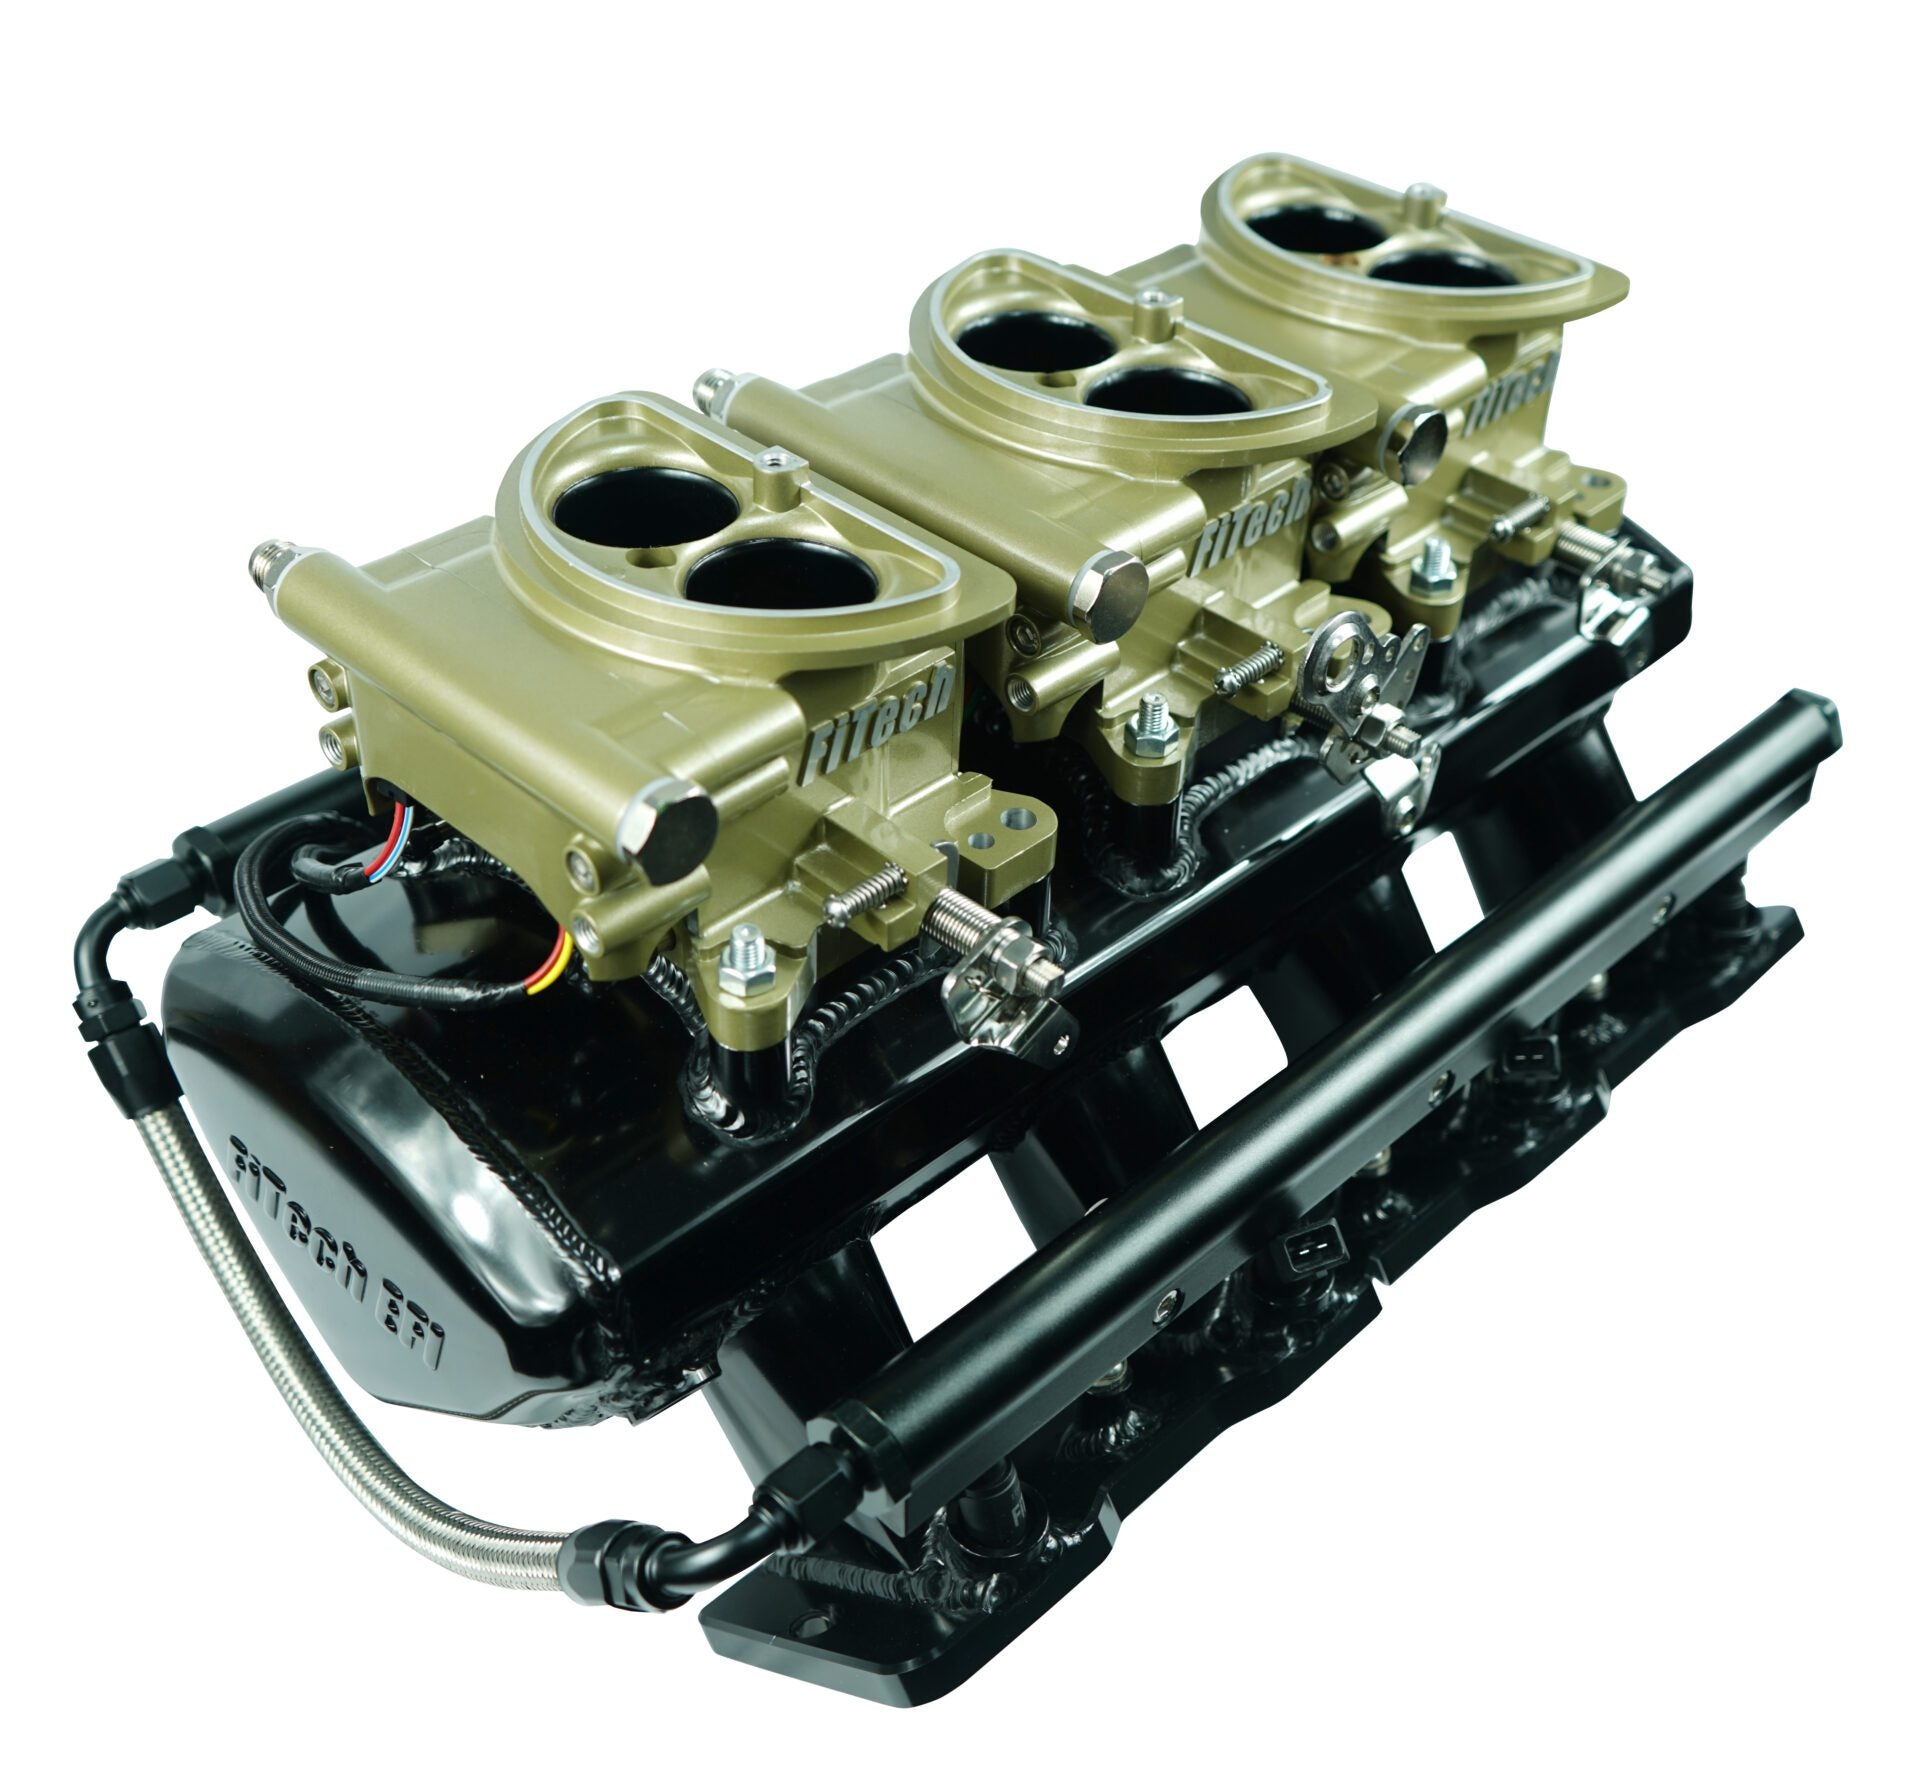 FiTech 70080 Ultimate LS 750 HP Tri Power EFI Sys w/ Cathedral Port Intake and Transm Control